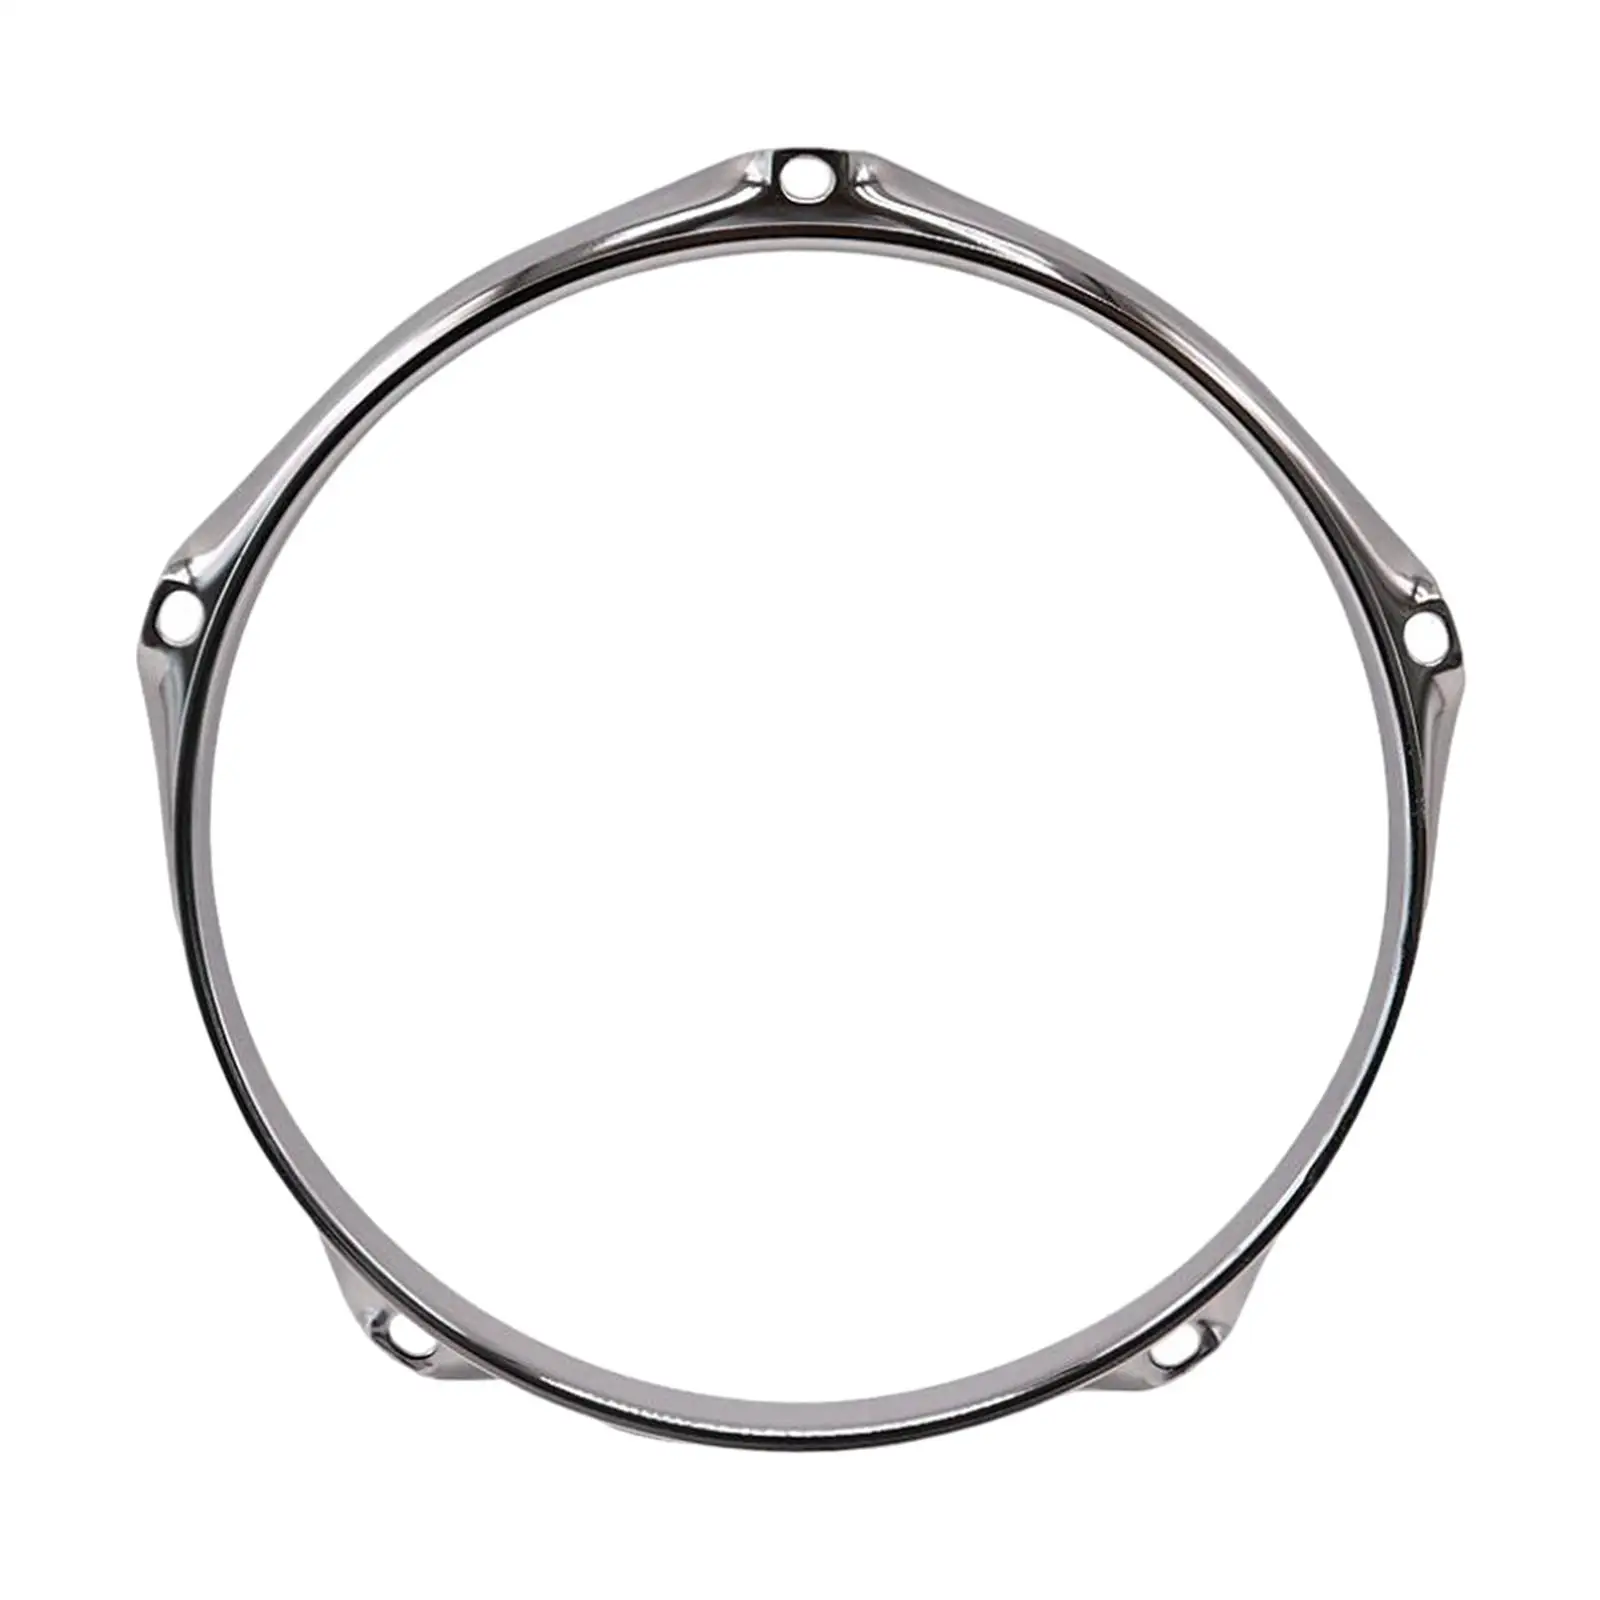 s Tom Drum Hoop Percussion Instrument Hoop for Accessory Home Decor